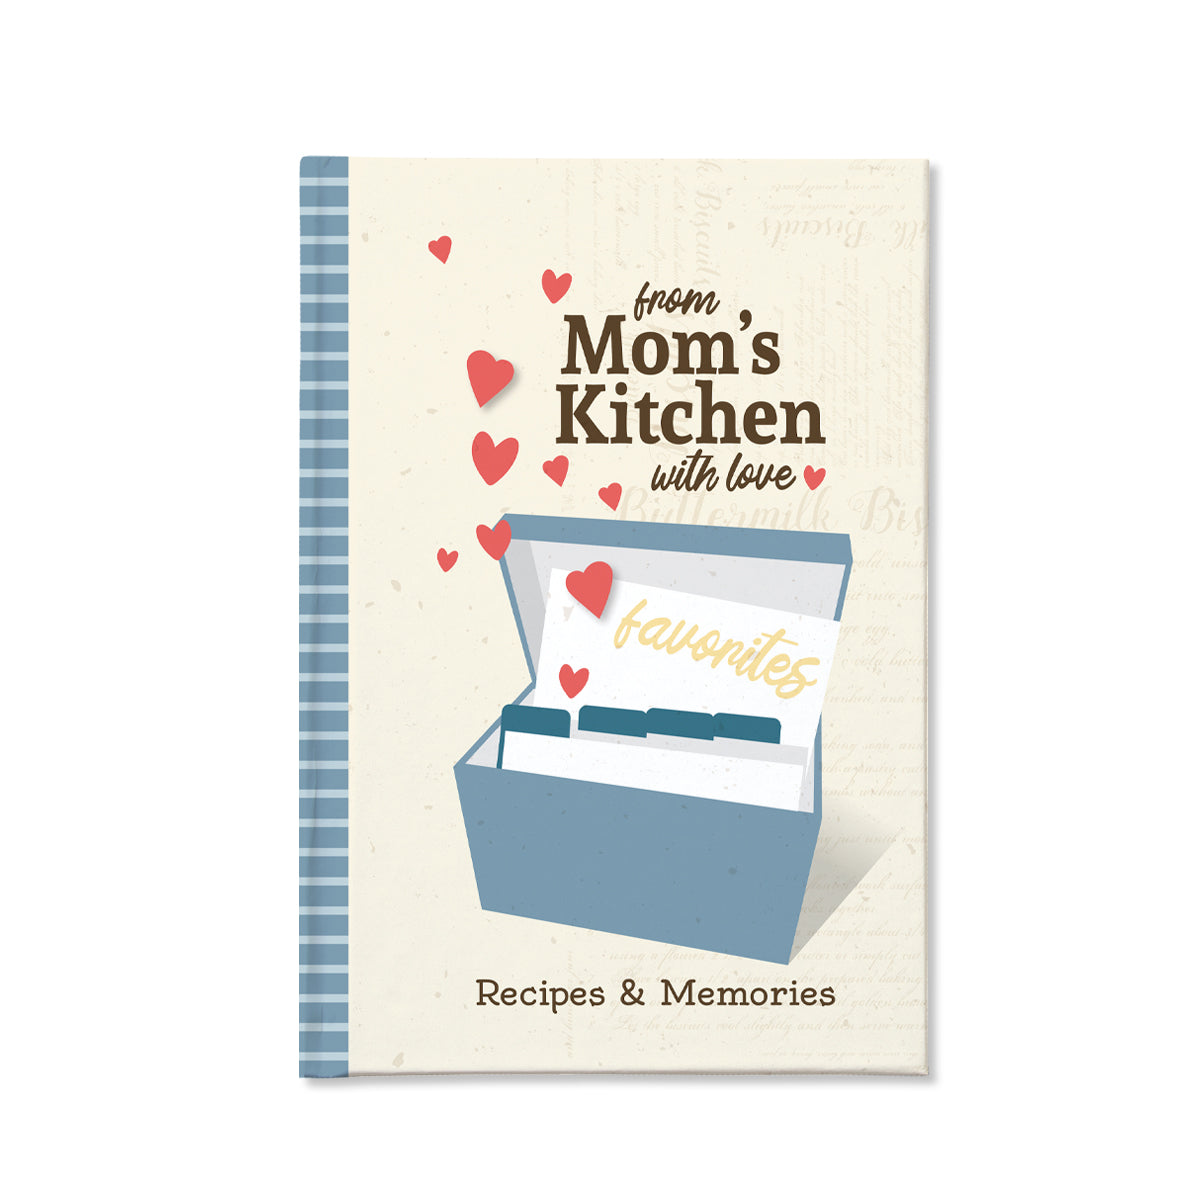 Cover of a book titled "From Mom's Kitchen with love" Recipes and Memories.